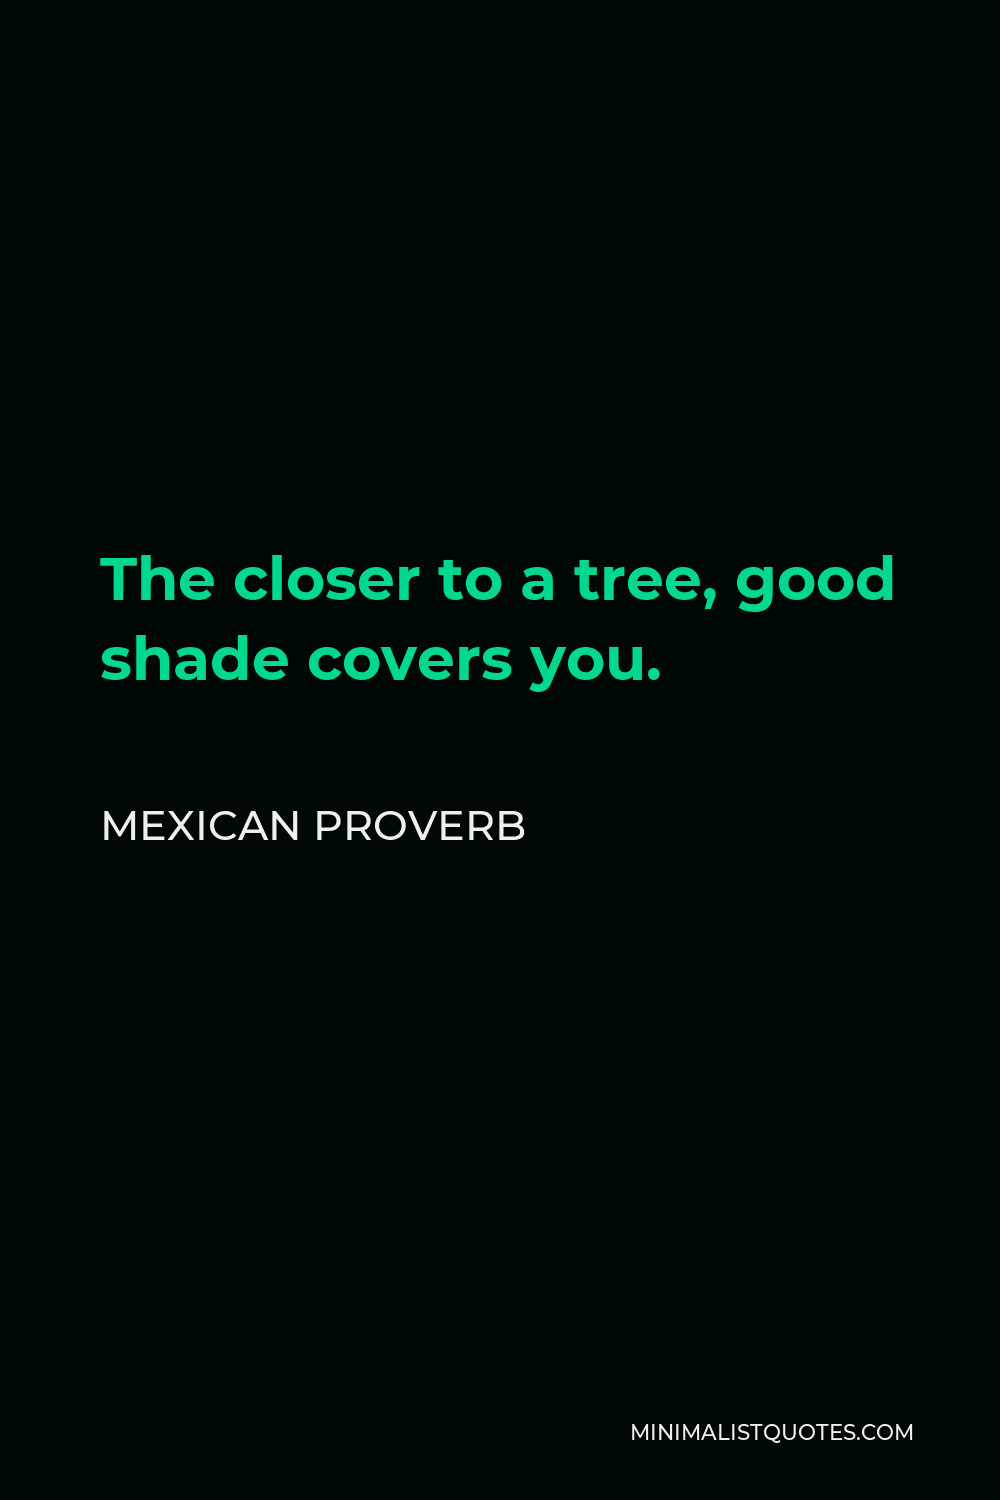 Mexican Proverb Quote - The closer to a tree, good shade covers you.